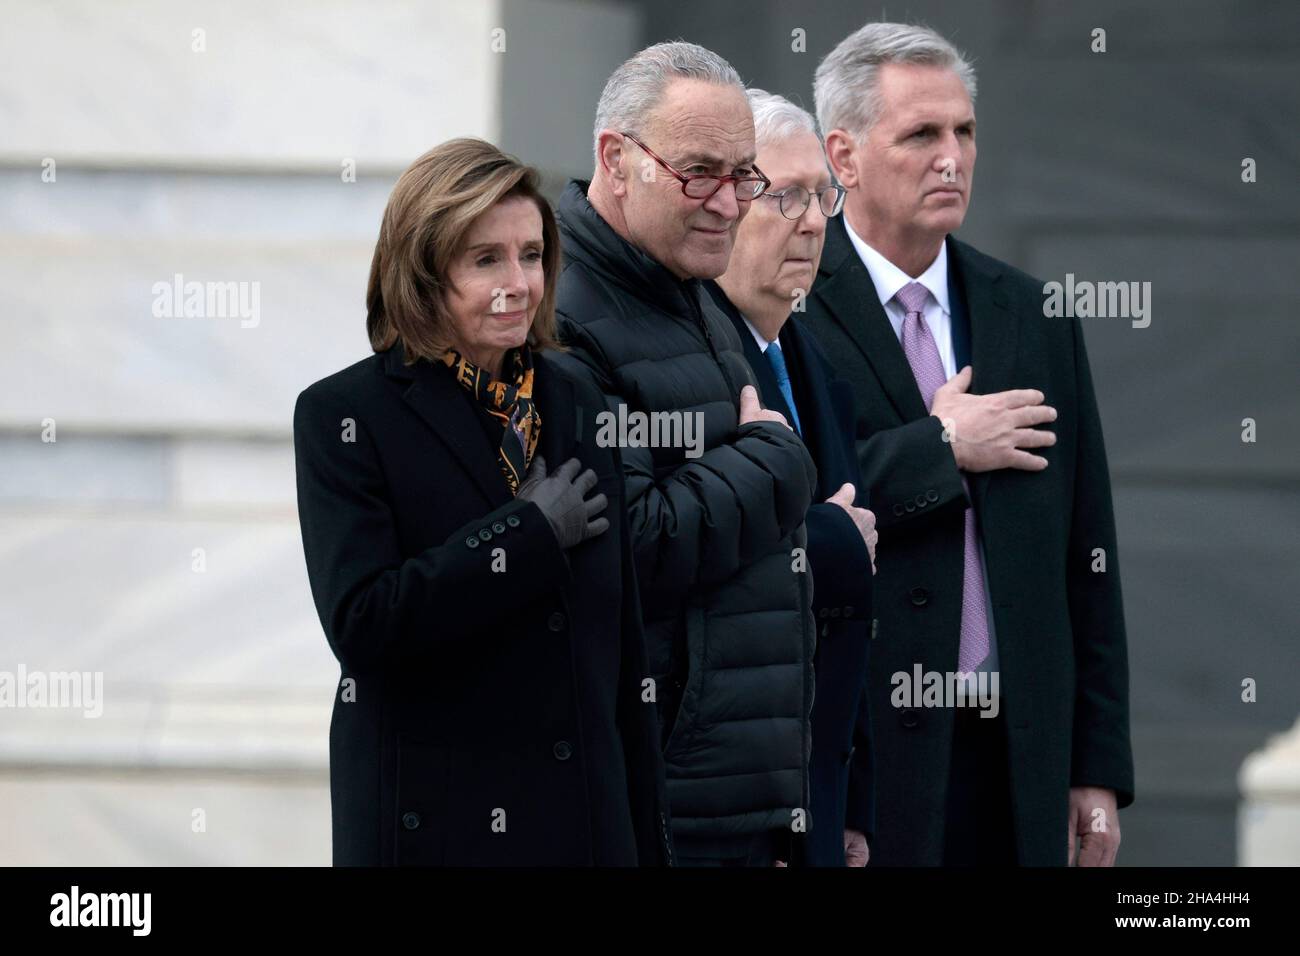 WASHINGTON, DC - DECEMBER 10: Speaker of the House Nancy Pelosi (D-CA), Majority Leader Charles Schumer (D-NY), Minority Leader Mitch McConnell (R-KY) and House Minority Leader Kevin McCarthy (R-CA) watch as joint services military honor guard carries the casket of the late Sen. Robert Dole (R-KS) down the steps of the U.S. Capitol after lying in state on December 10, 2021 in Washington, DC. Dole, a veteran who was severely injured in World War II, was a Republican Senator from Kansas from 1969 to 1996. He ran for president three times and became the Republican nominee for president in 1996. ( Stock Photo